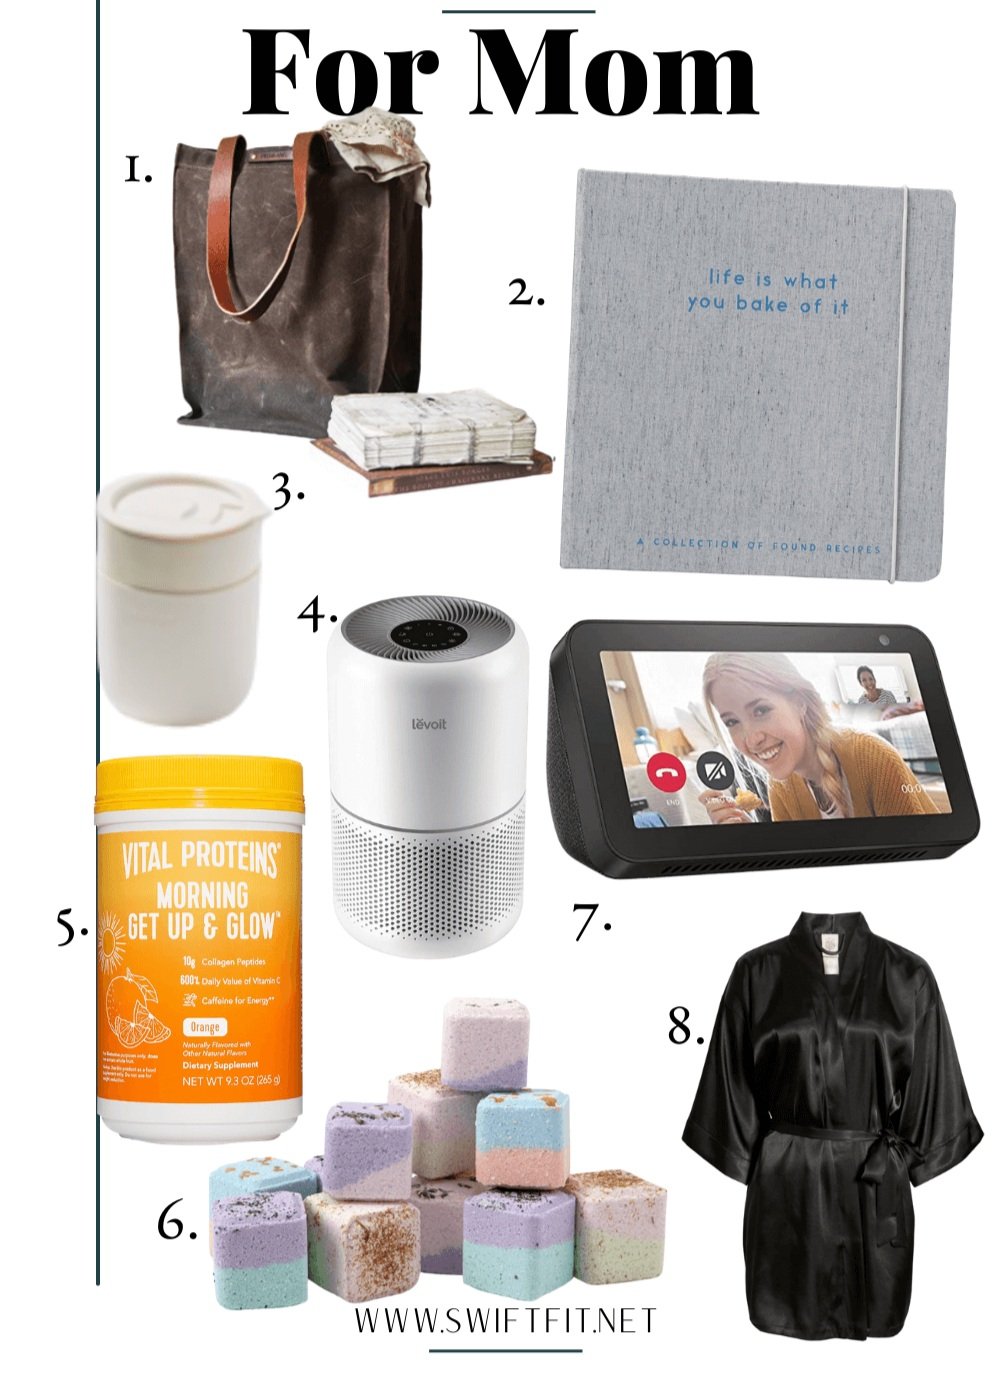 Christmas Gift Ideas for Moms & Dads - 4onemore